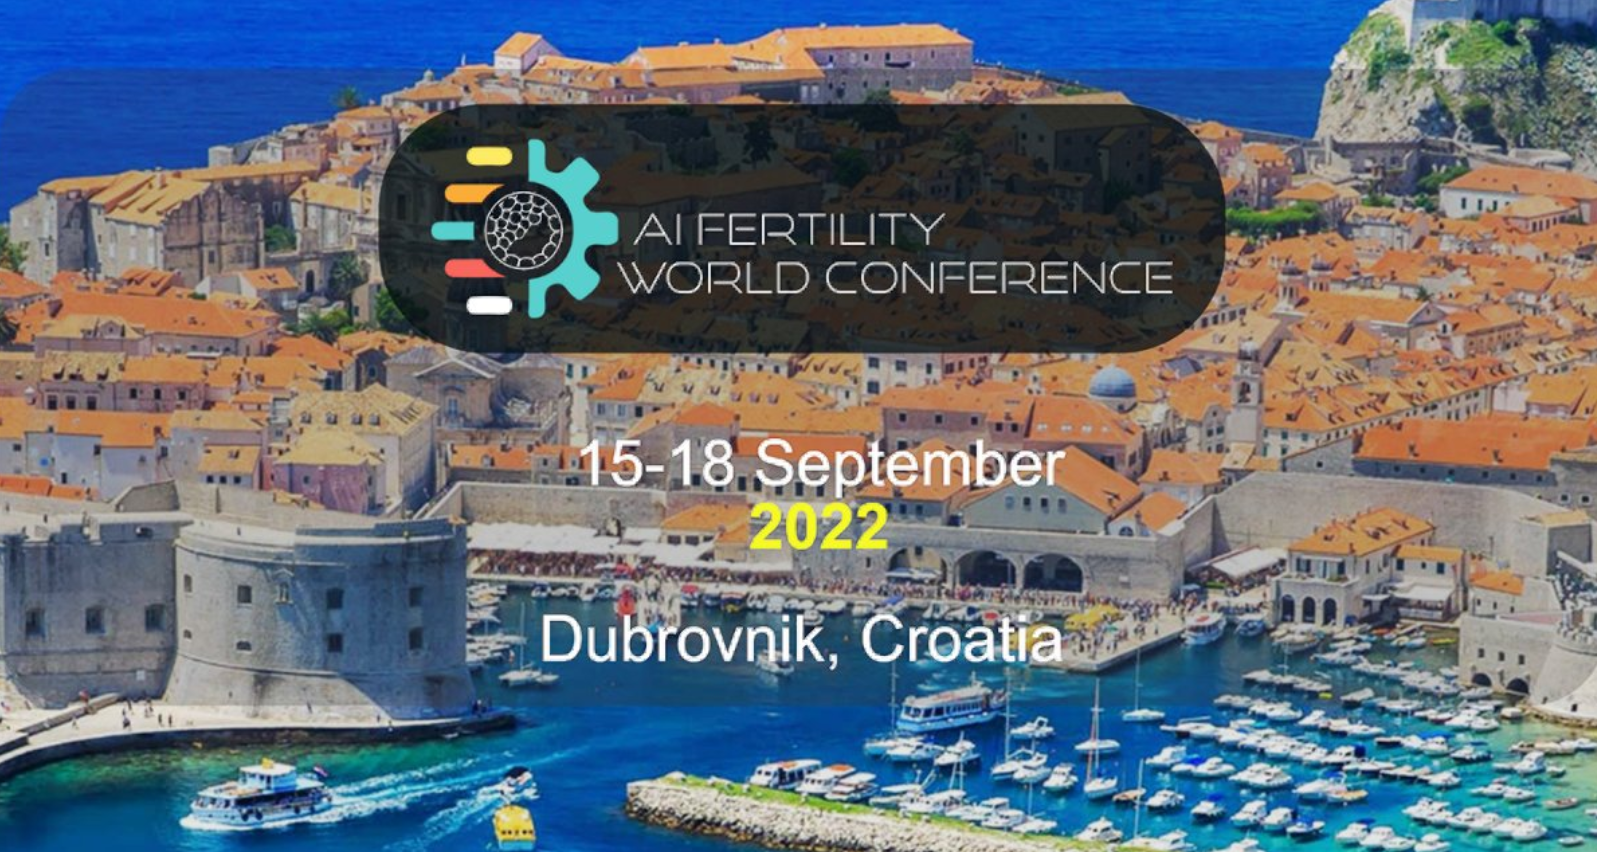 HYLIGHT Project at the “AI Fertility World Conference 2022”